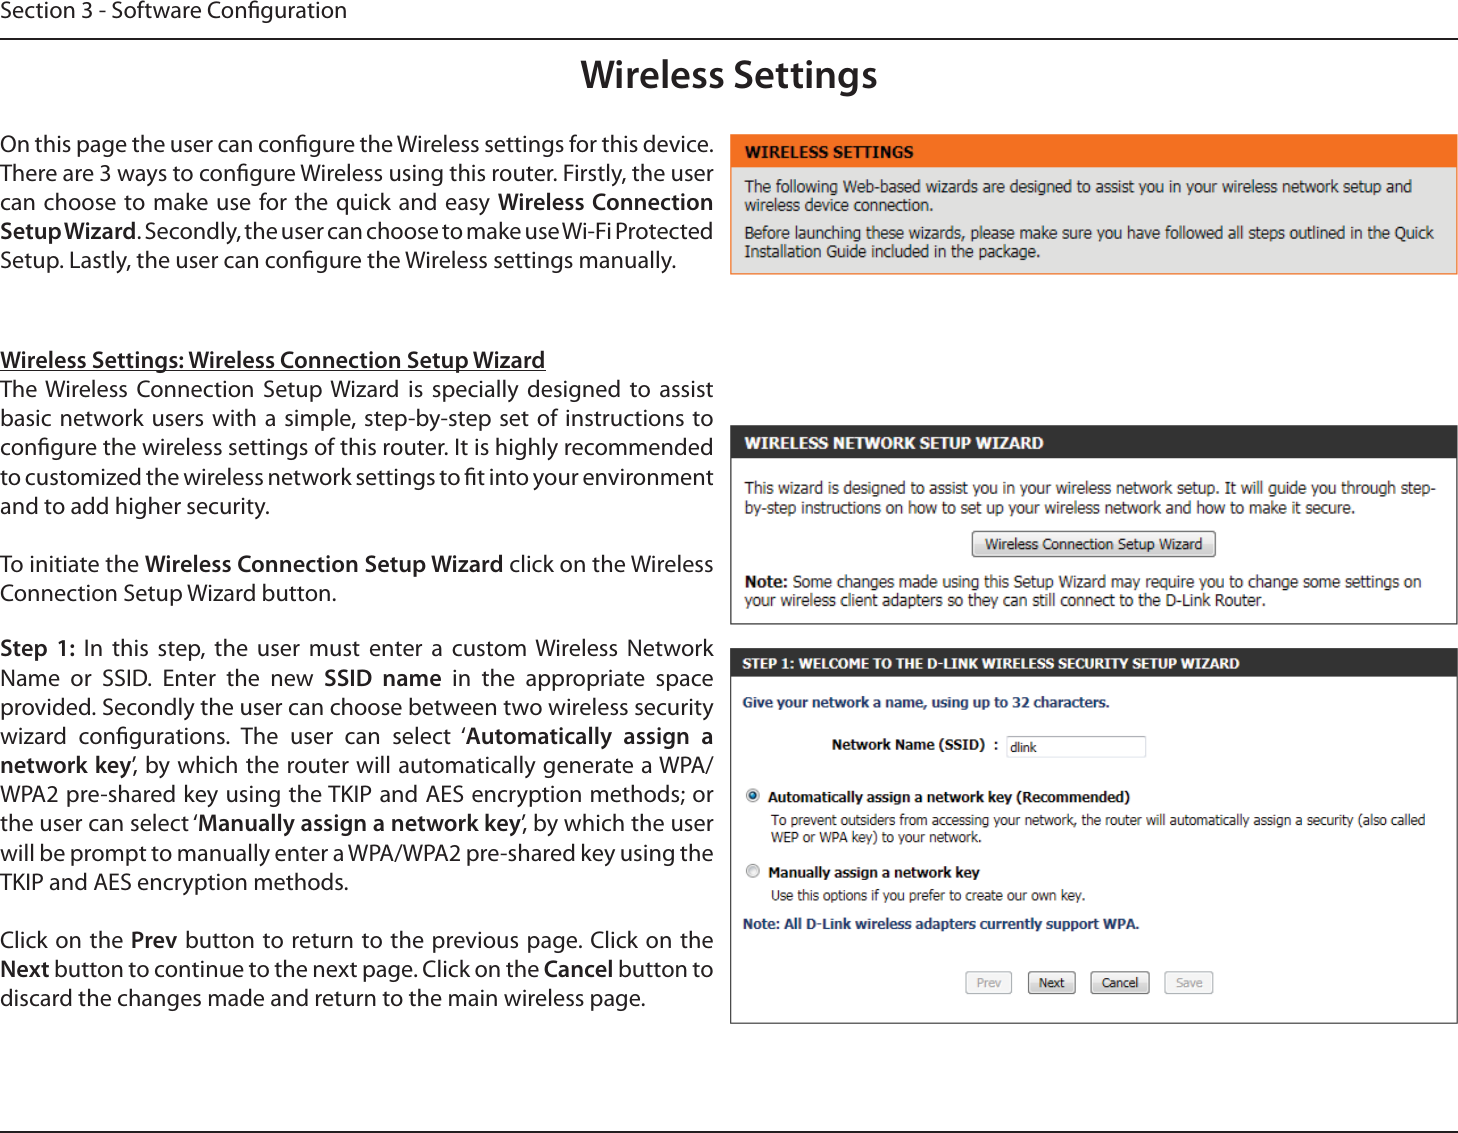 Section 3 - Software CongurationWireless SettingsOn this page the user can congure the Wireless settings for this device. There are 3 ways to congure Wireless using this router. Firstly, the user can choose to make use for the quick and easy Wireless Connection Setup Wizard. Secondly, the user can choose to make use Wi-Fi Protected Setup. Lastly, the user can congure the Wireless settings manually.Wireless Settings: Wireless Connection Setup WizardThe Wireless Connection Setup Wizard is specially designed to assist basic network users with a simple, step-by-step set of instructions to congure the wireless settings of this router. It is highly recommended to customized the wireless network settings to t into your environment and to add higher security.To initiate the Wireless Connection Setup Wizard click on the Wireless Connection Setup Wizard button.Step 1: In this step, the user must enter a custom Wireless Network Name or SSID. Enter the new SSID name in the appropriate space provided. Secondly the user can choose between two wireless security wizard congurations. The user can select ‘Automatically assign a network key’, by which the router will automatically generate a WPA/WPA2 pre-shared key using the TKIP and AES encryption methods; or the user can select ‘Manually assign a network key’, by which the user will be prompt to manually enter a WPA/WPA2 pre-shared key using the TKIP and AES encryption methods.Click on the Prev button to return to the previous page. Click on the Next button to continue to the next page. Click on the Cancel button to discard the changes made and return to the main wireless page.